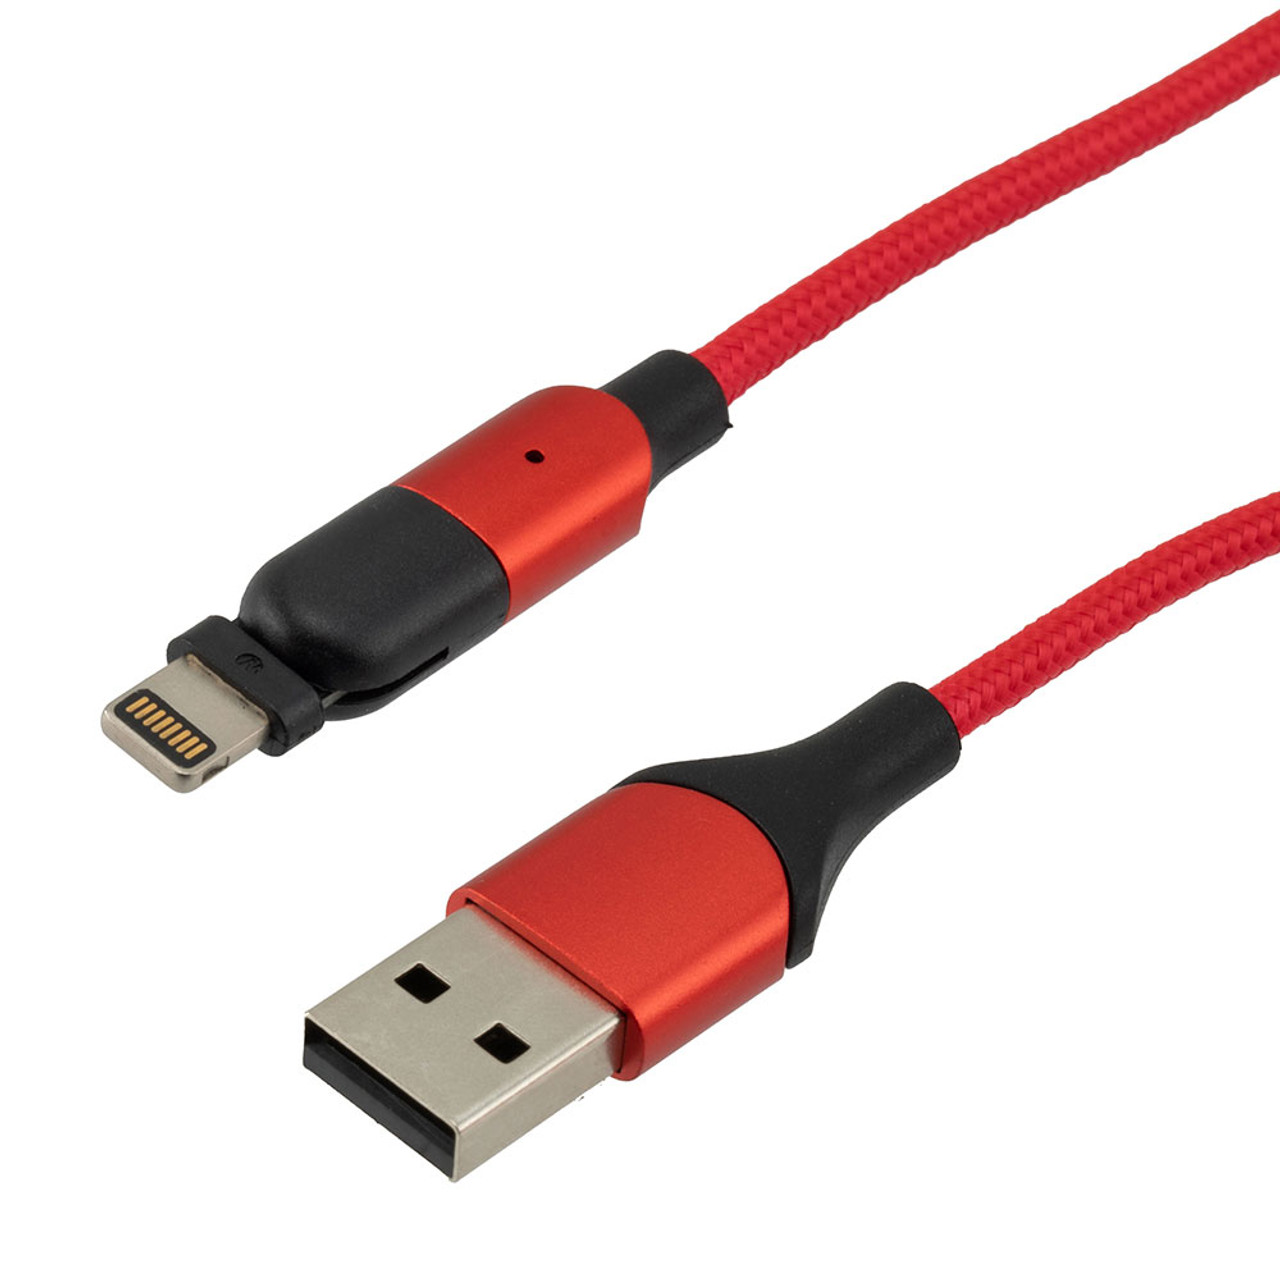 NavePoint USB 2.0 180-degree Rotating Head PVC Nylon Braided Cable, Red, USB A Male to Lightning Compatible Male, 1 Meter 